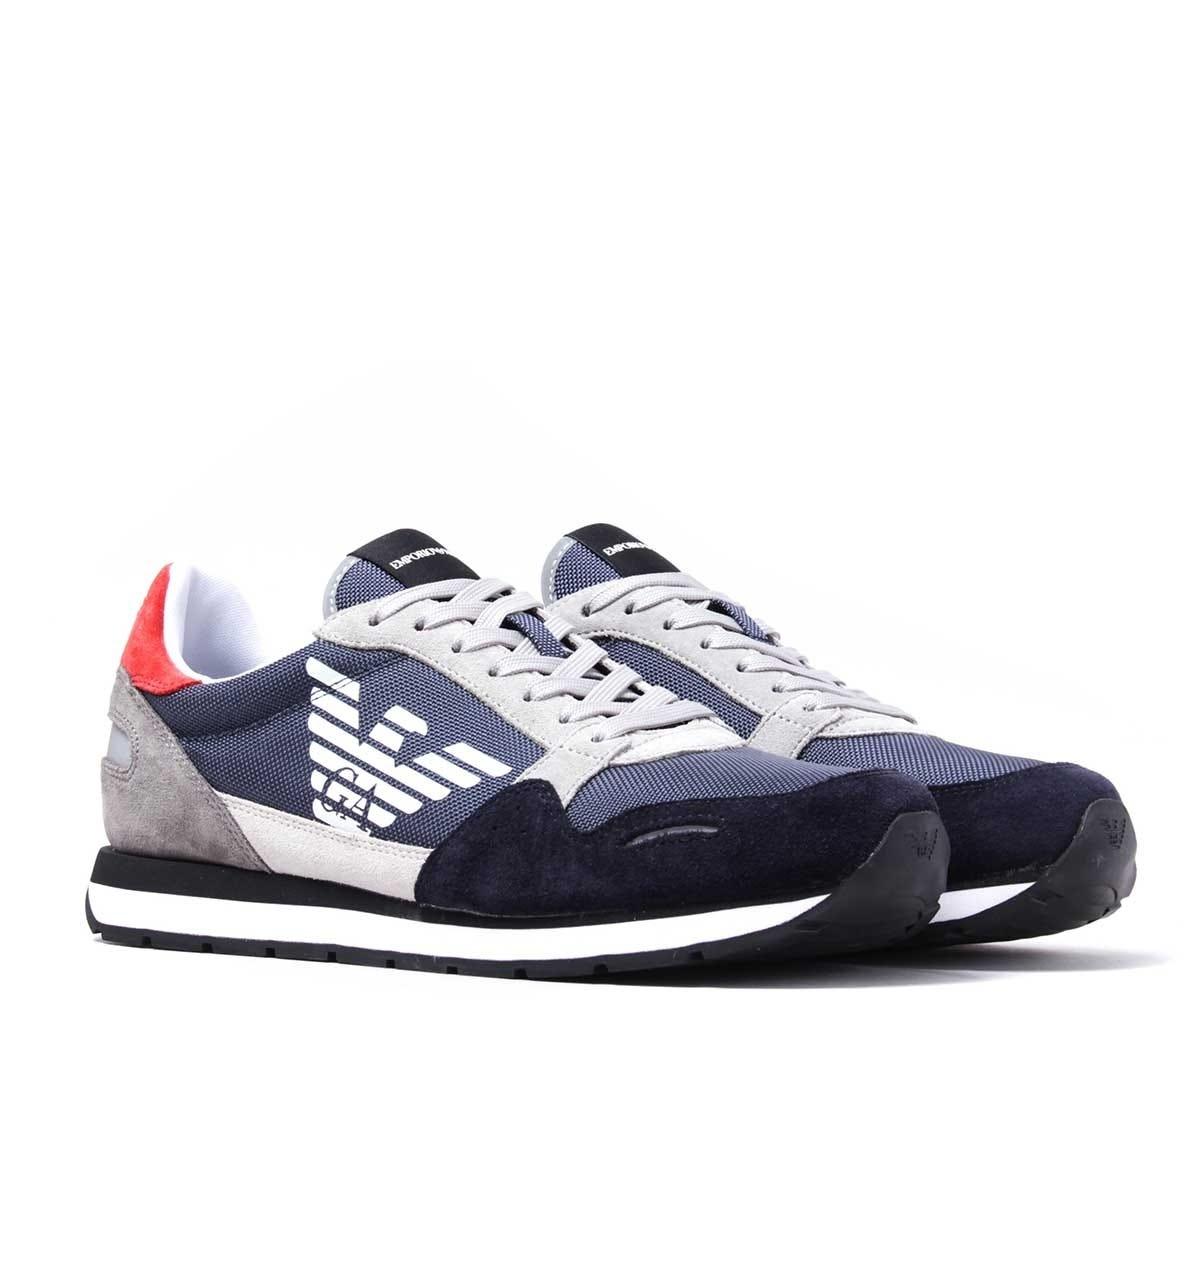 Emporio Armani Suede Eagle Logo Navy Runner Trainers in Blue for Men - Lyst